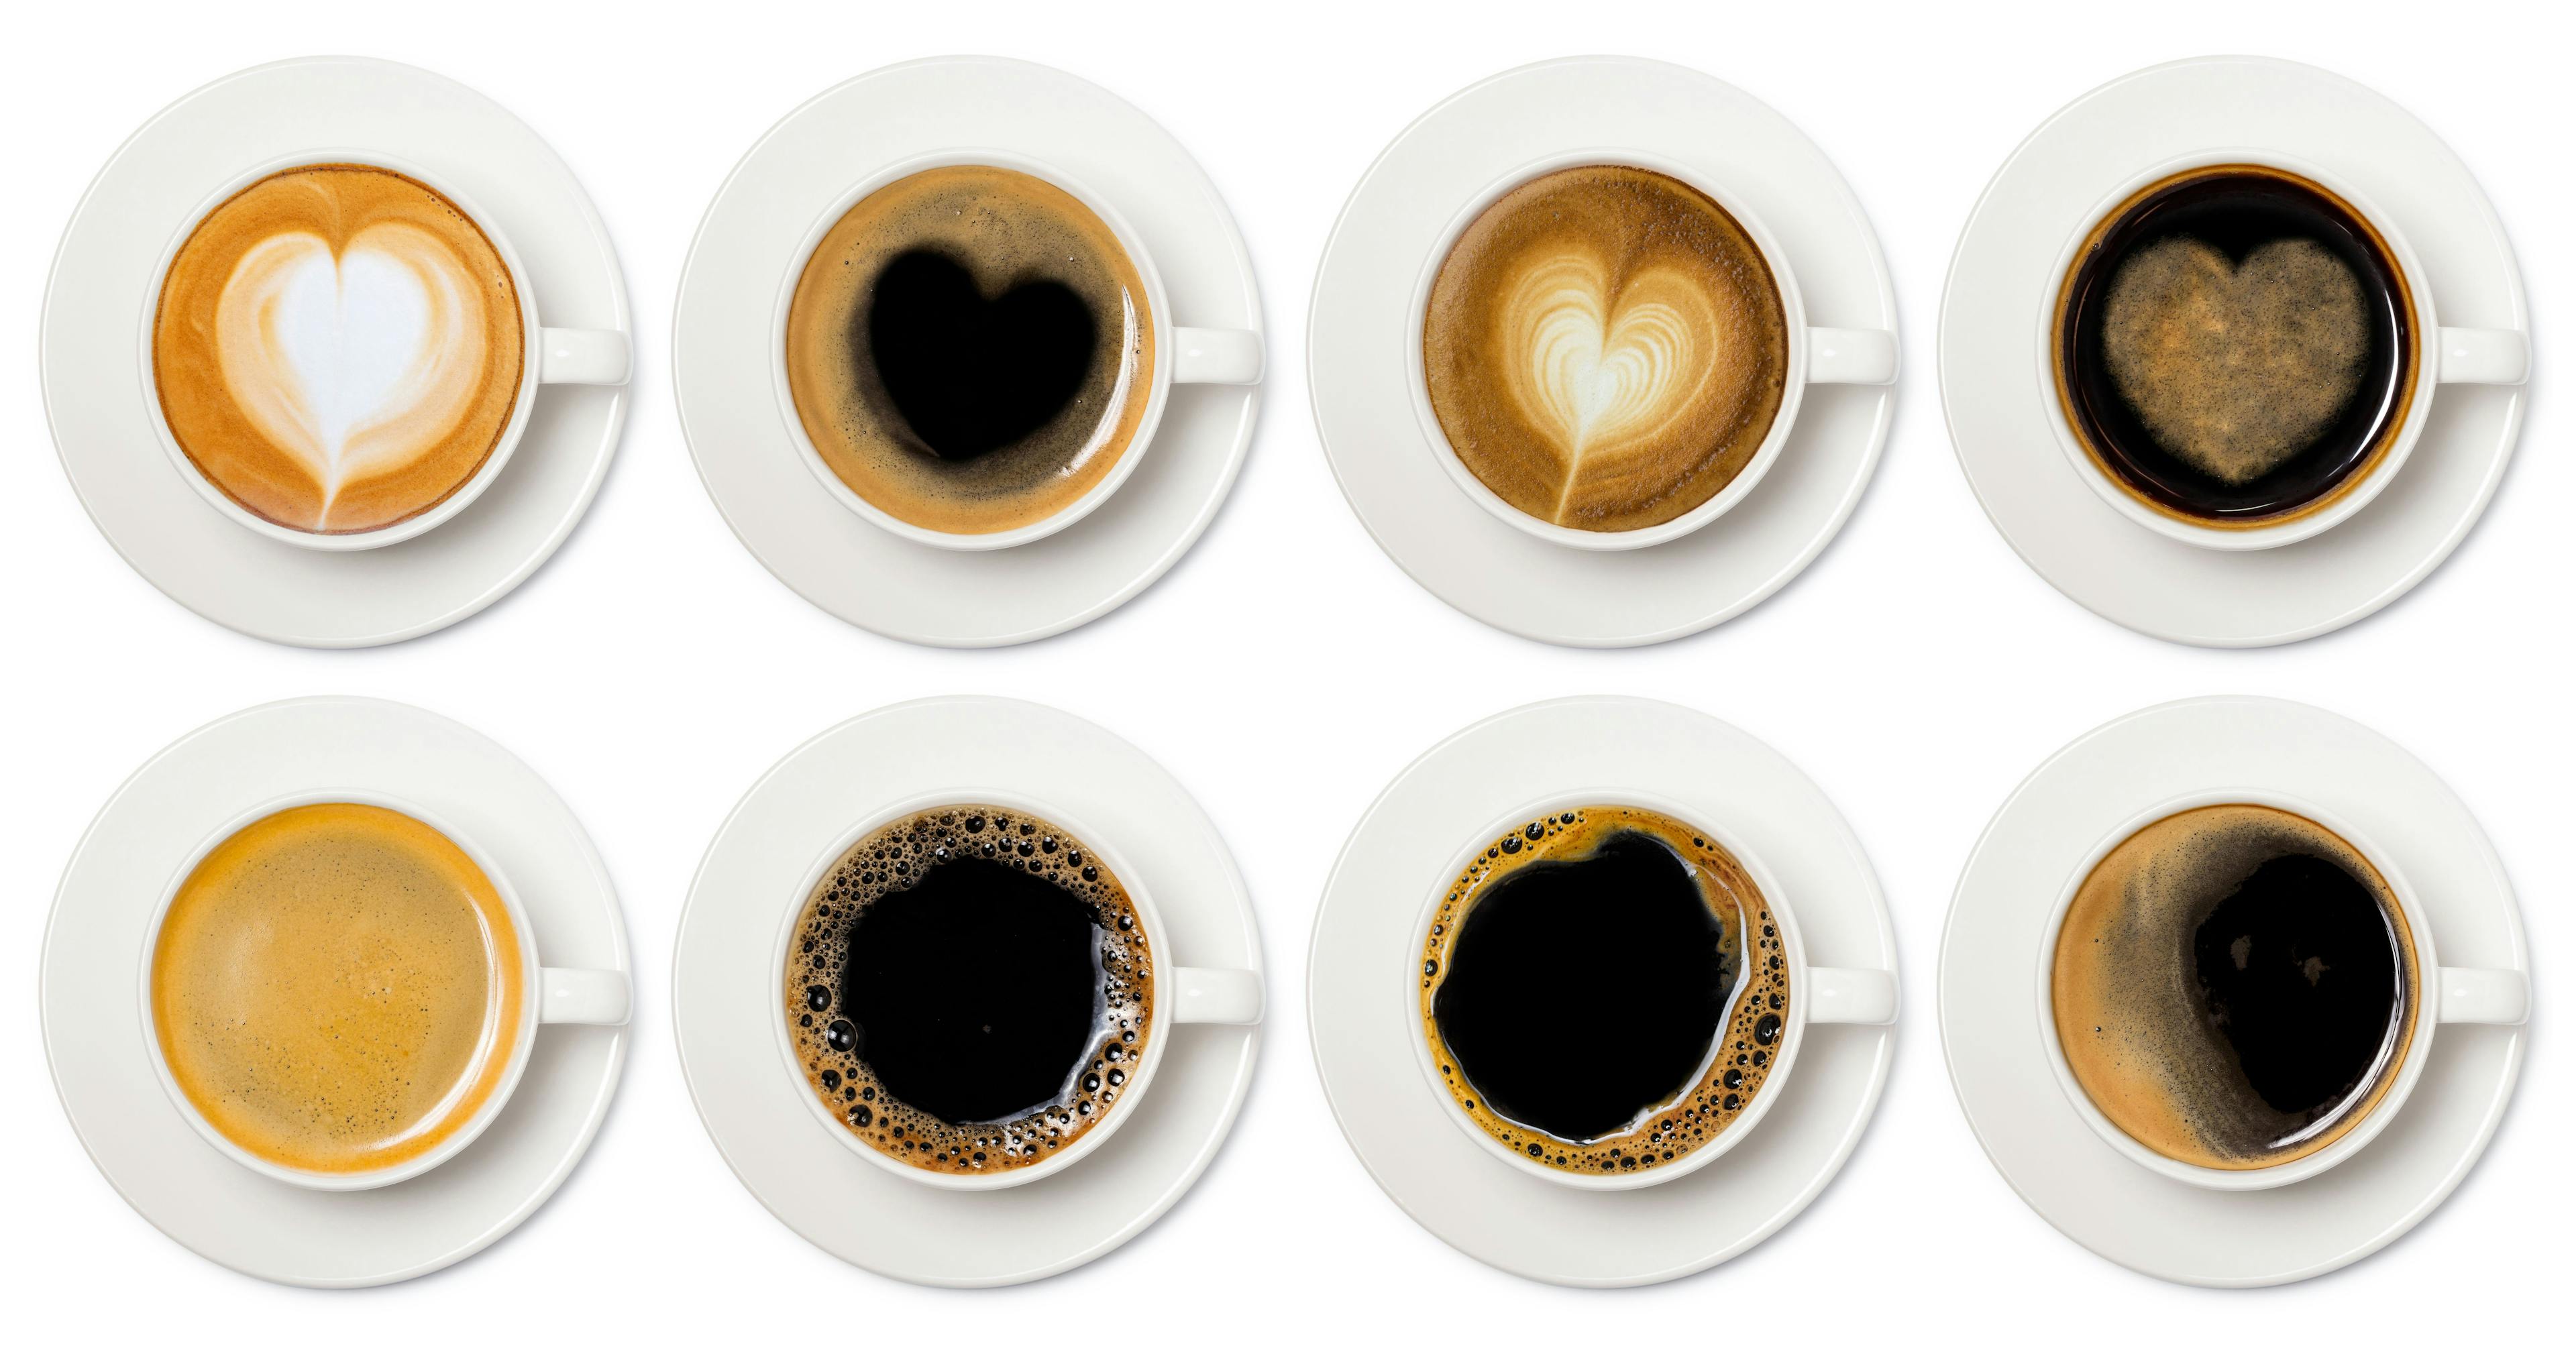 An Extra Cup: Caffeine Intake and Symptoms in Patients With Bipolar Disorder